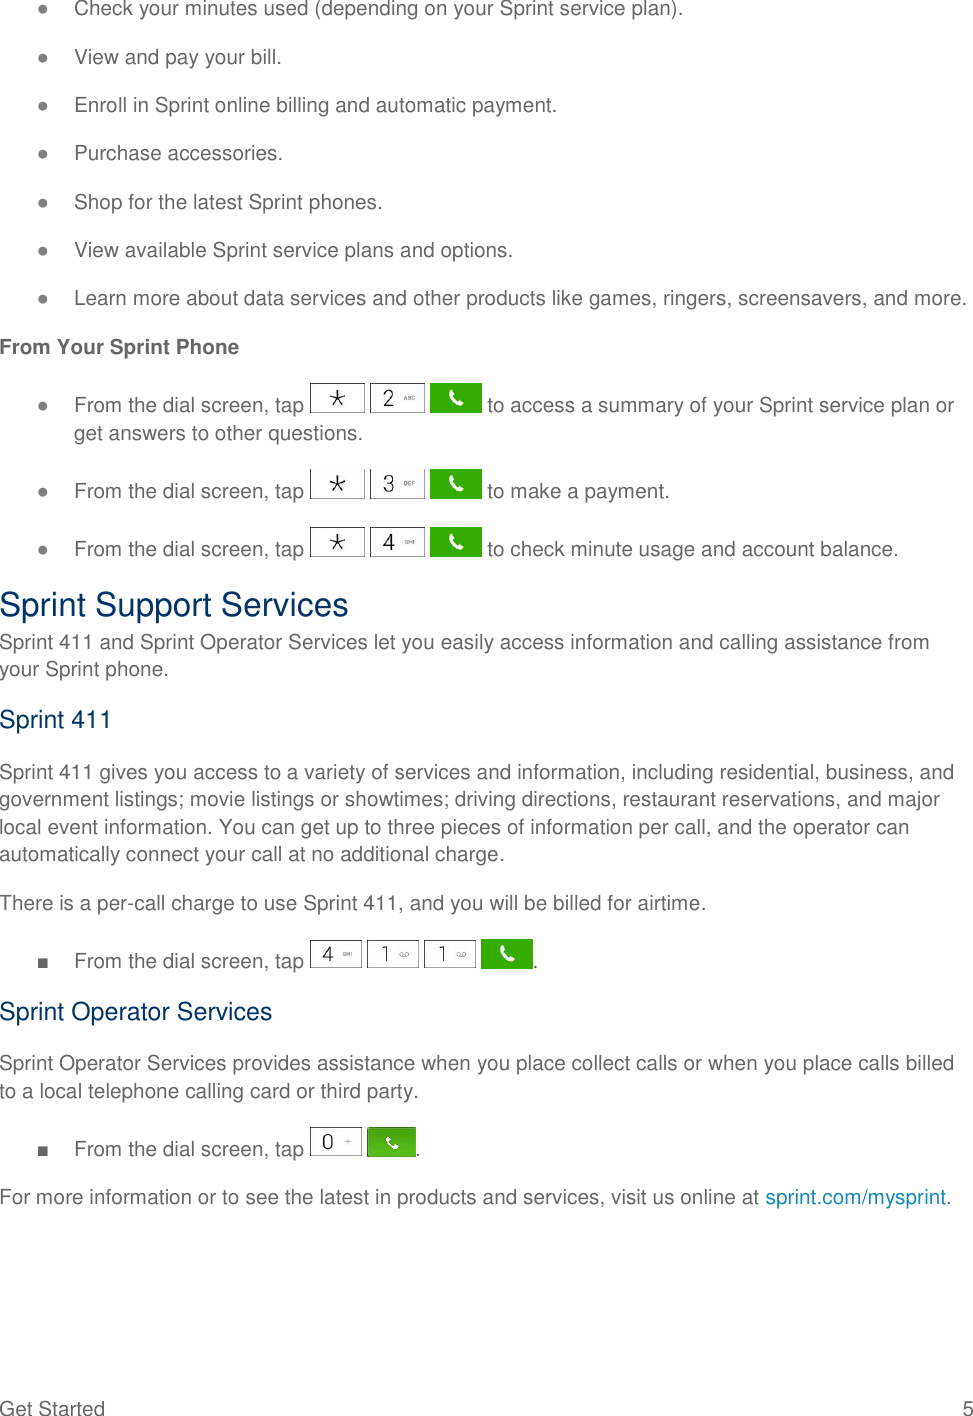 Get Started  5 ● Check your minutes used (depending on your Sprint service plan). ● View and pay your bill. ● Enroll in Sprint online billing and automatic payment. ● Purchase accessories. ● Shop for the latest Sprint phones. ● View available Sprint service plans and options. ● Learn more about data services and other products like games, ringers, screensavers, and more. From Your Sprint Phone ● From the dial screen, tap       to access a summary of your Sprint service plan or get answers to other questions. ● From the dial screen, tap       to make a payment. ● From the dial screen, tap       to check minute usage and account balance. Sprint Support Services Sprint 411 and Sprint Operator Services let you easily access information and calling assistance from your Sprint phone. Sprint 411 Sprint 411 gives you access to a variety of services and information, including residential, business, and government listings; movie listings or showtimes; driving directions, restaurant reservations, and major local event information. You can get up to three pieces of information per call, and the operator can automatically connect your call at no additional charge. There is a per-call charge to use Sprint 411, and you will be billed for airtime. ■  From the dial screen, tap        . Sprint Operator Services Sprint Operator Services provides assistance when you place collect calls or when you place calls billed to a local telephone calling card or third party. ■  From the dial screen, tap    . For more information or to see the latest in products and services, visit us online at sprint.com/mysprint.  